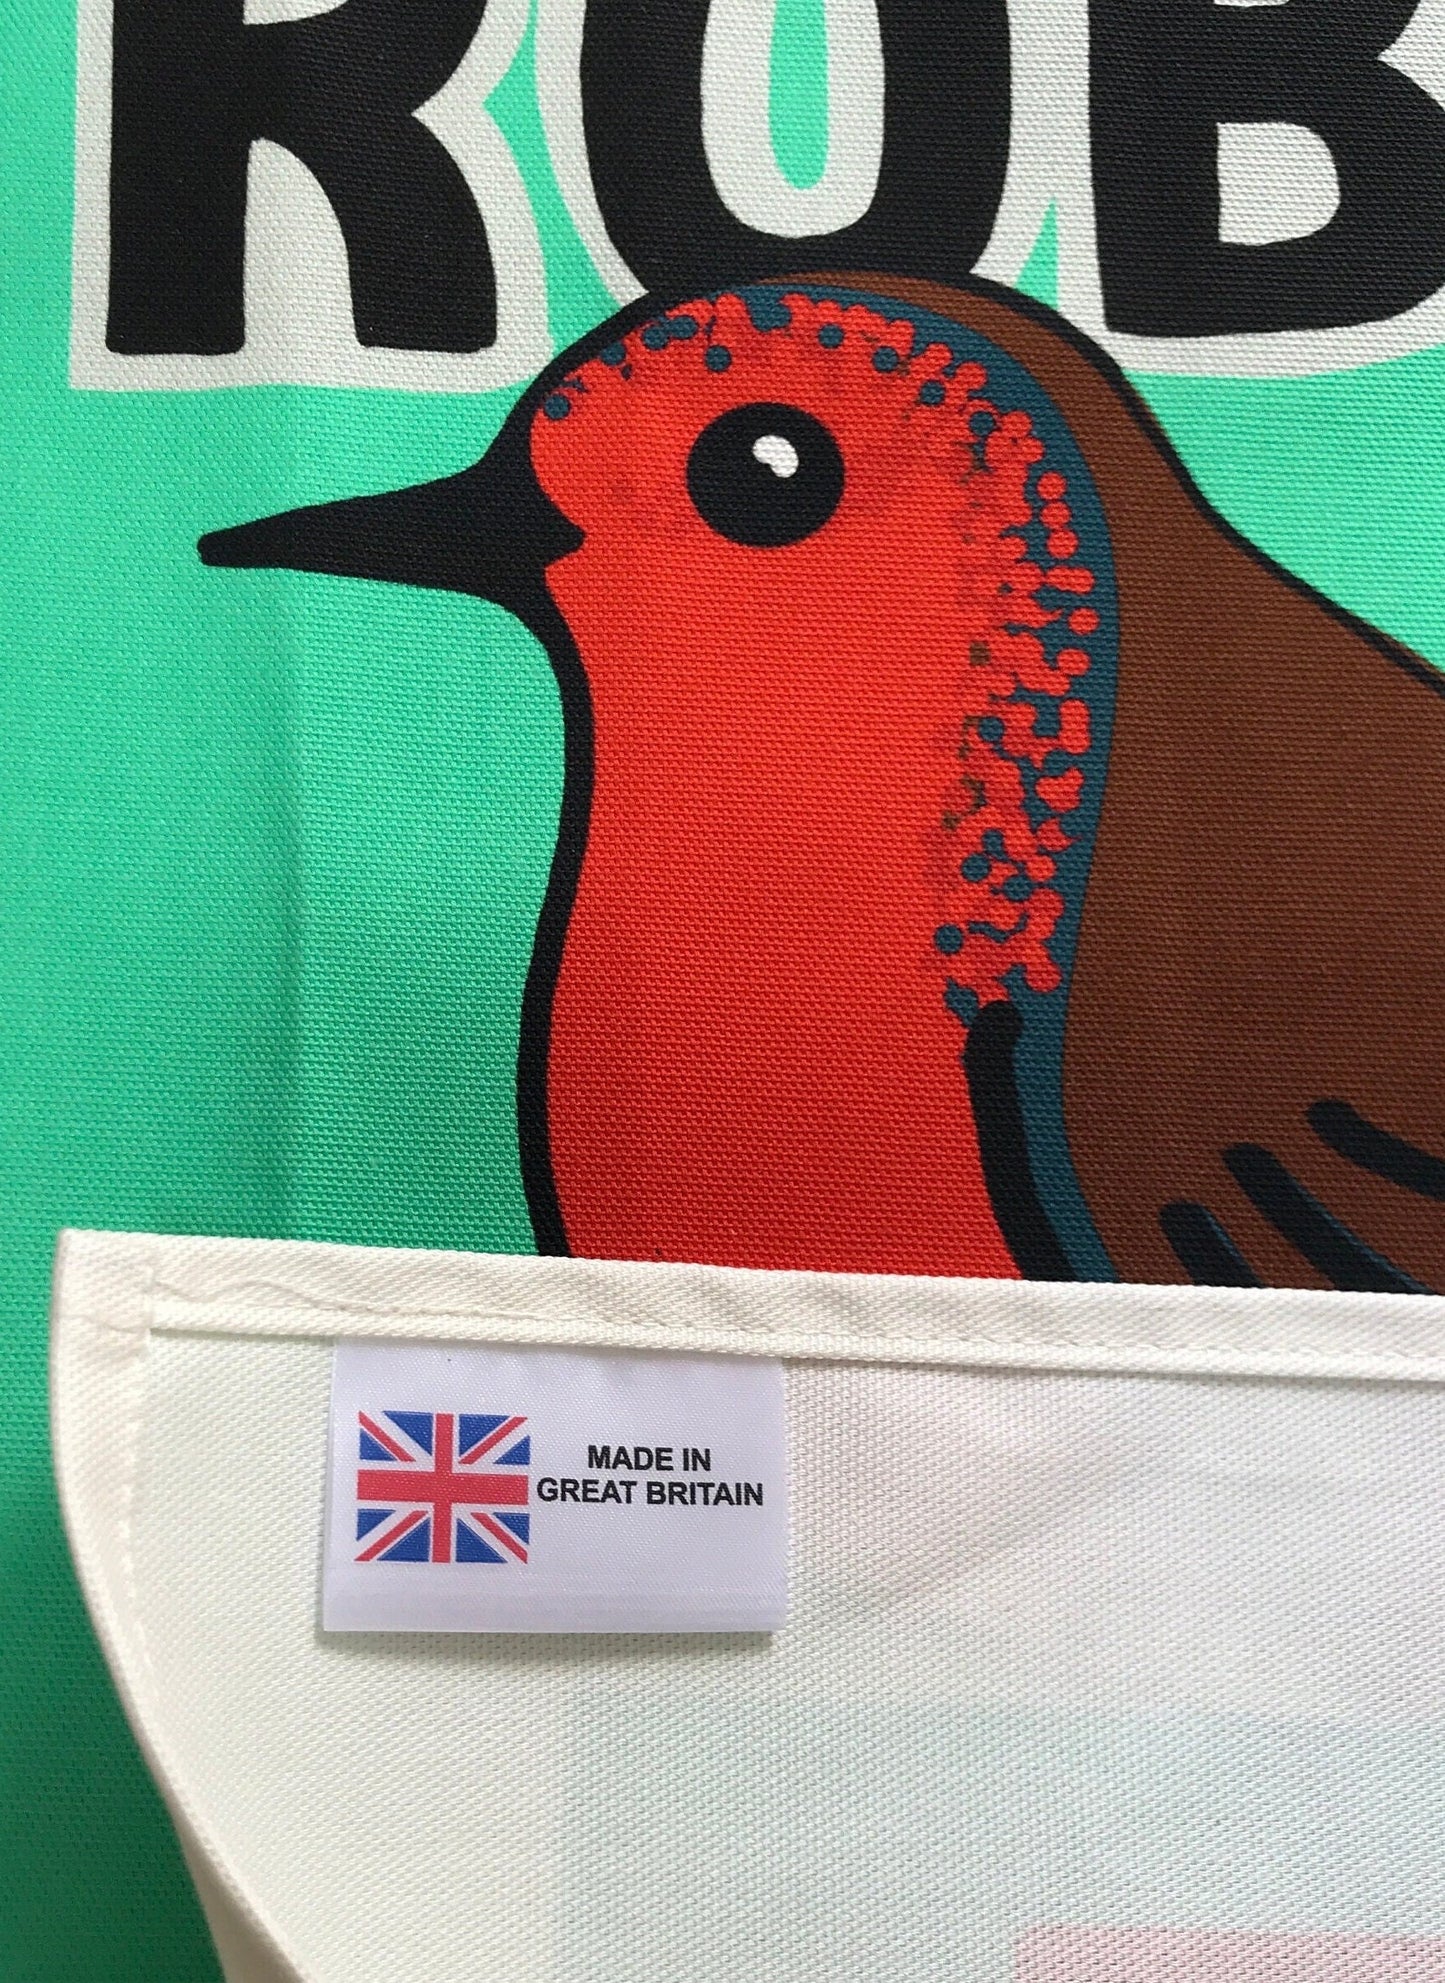 100% Cotton Robin Tea Towel, Matchbox label art, Designed and Printed in the UK